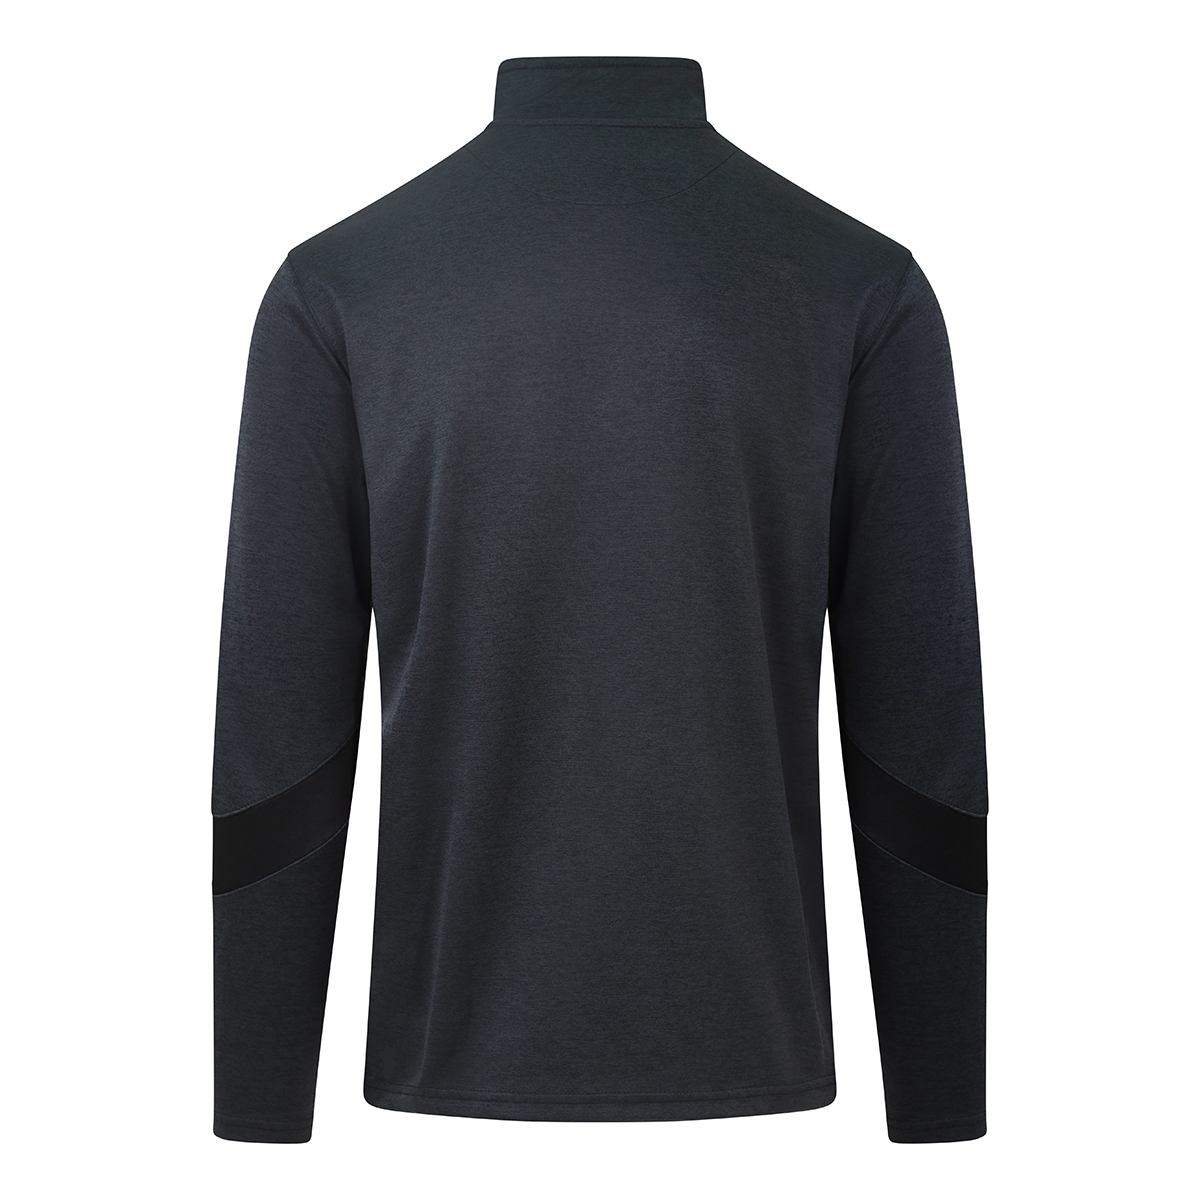 Mc Keever Ashbourne Rugby Core 22 1/4 Zip Top - Adult - Black